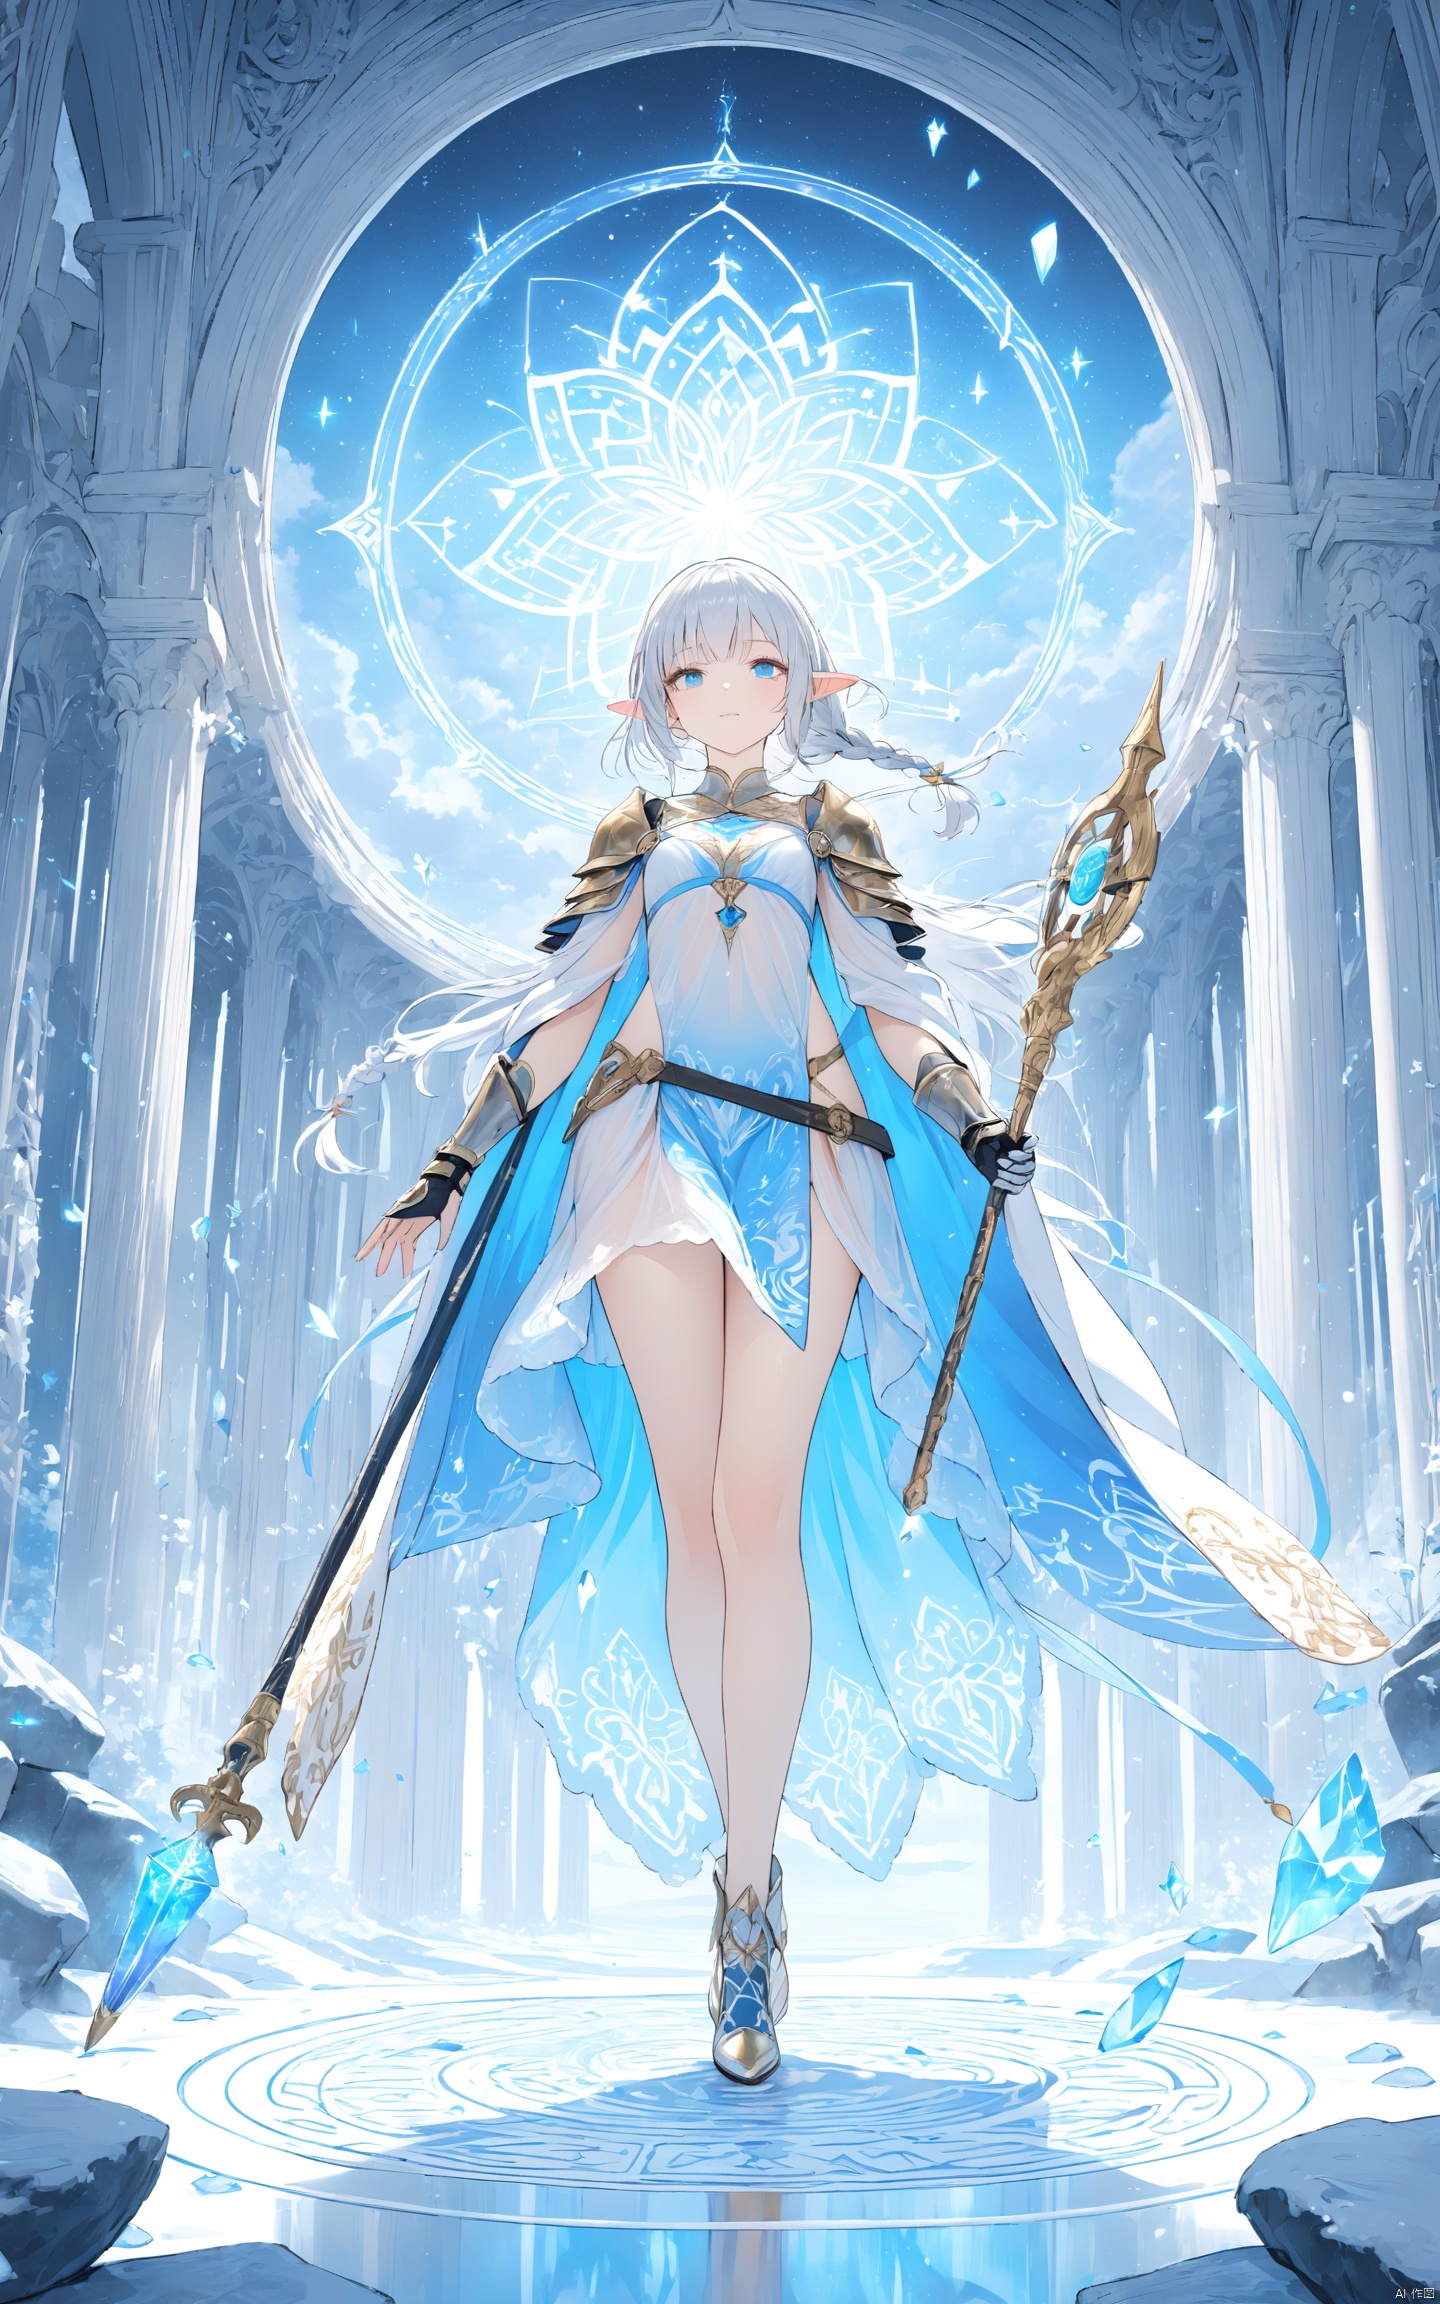  (masterpiece),(best quality),illustration,ultra detailed,hdr,Depth of field,(colorful),1 character, fantasy heroine, final fantasy style, full body, intricate white mage robes with gold embroidery and flowing ribbons, ornate staff topped with a glowing crystal, pointed elven ears, voluminous silver hair styled in elegant braids cascading down her back, sky blue eyes with a hint of mystical light, delicate yet detailed gauntlets reaching to the elbows, armored pauldrons protecting her shoulders, sheer inner garment revealing subtle hints of an azure undergarment, serene expression, standing on a magical circle inscribed with ancient runes, casting a healing spell, surrounded by soft ethereal glow and floral motes.